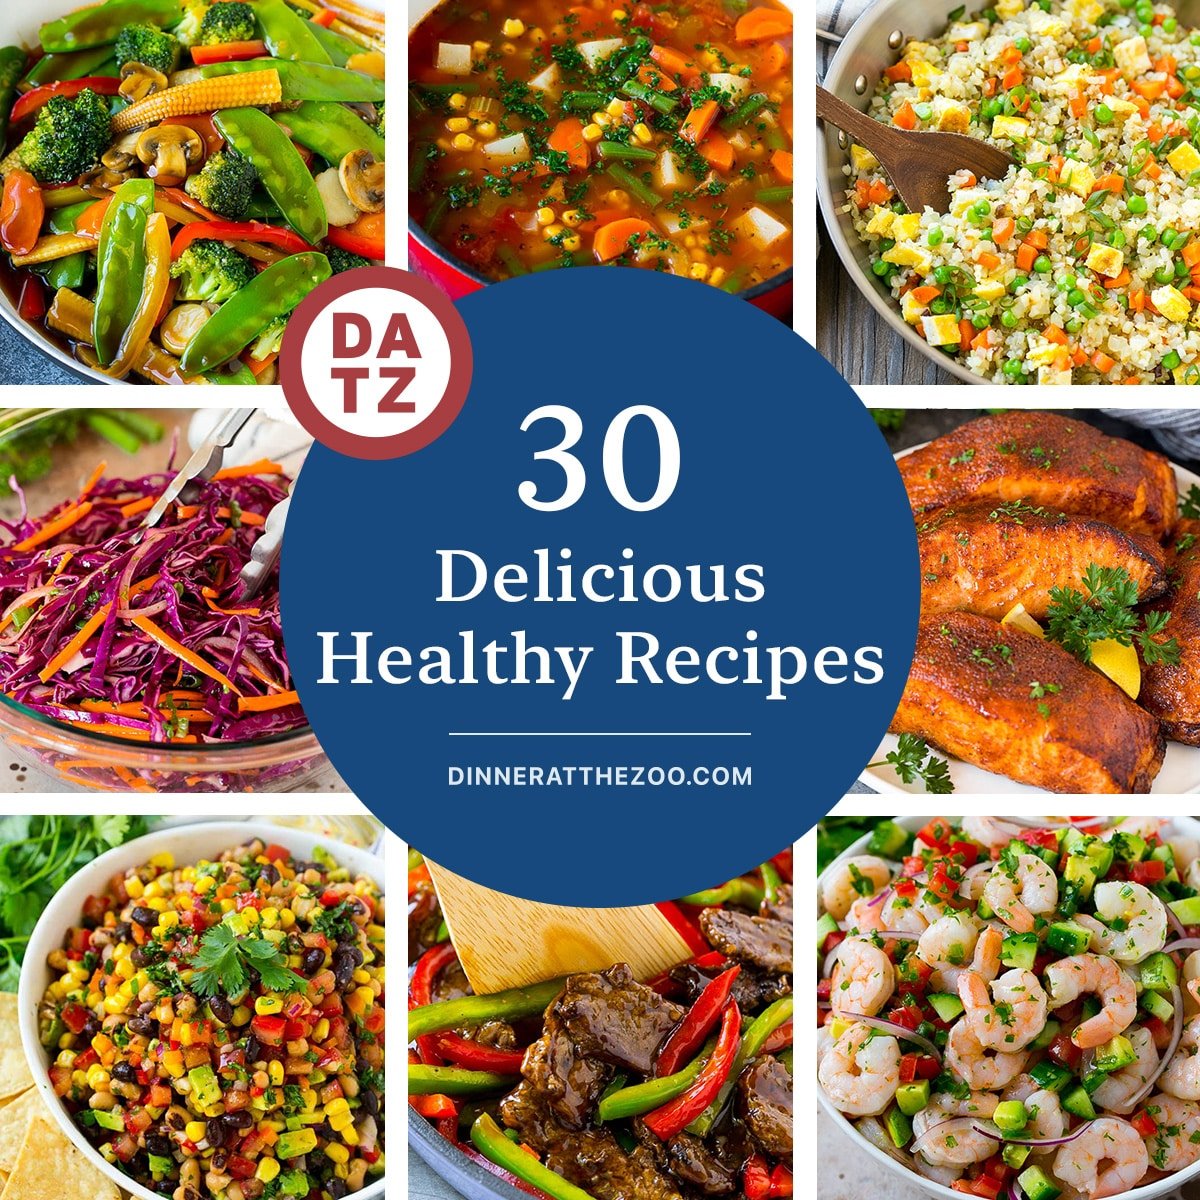 A list of delicious healthy recipes including vegetable stir fry, red cabbage slaw and air fryer salmon.